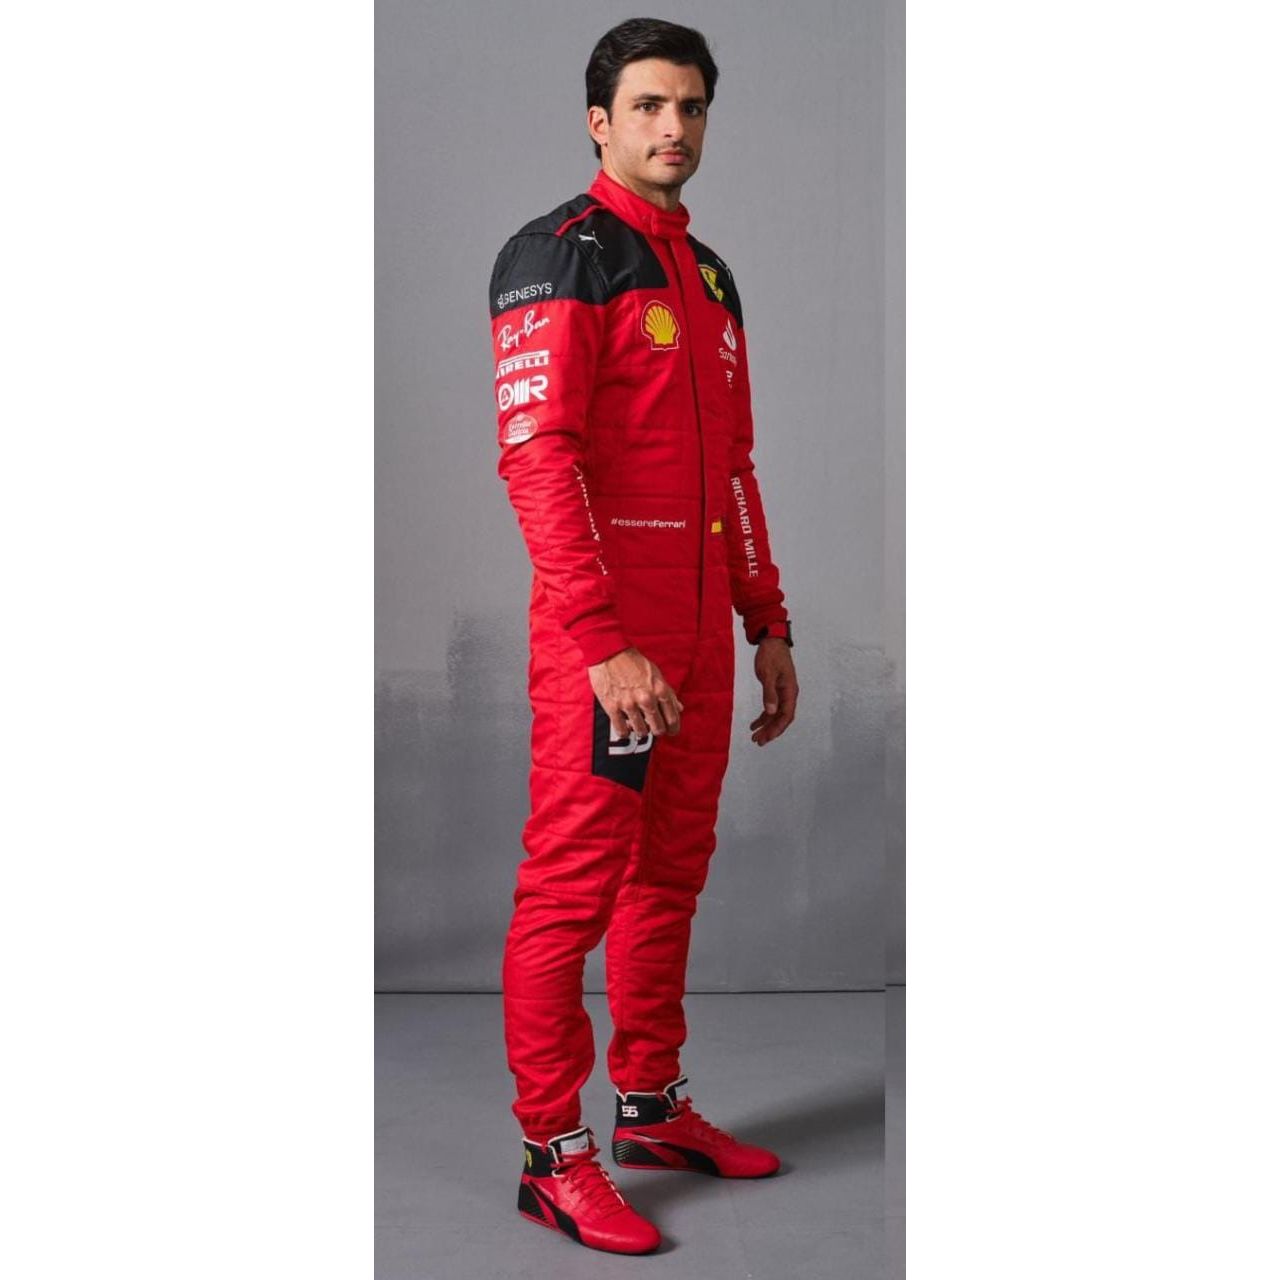 Go kart racing Sublimation Protective clothing Racing gear Suit N-0233